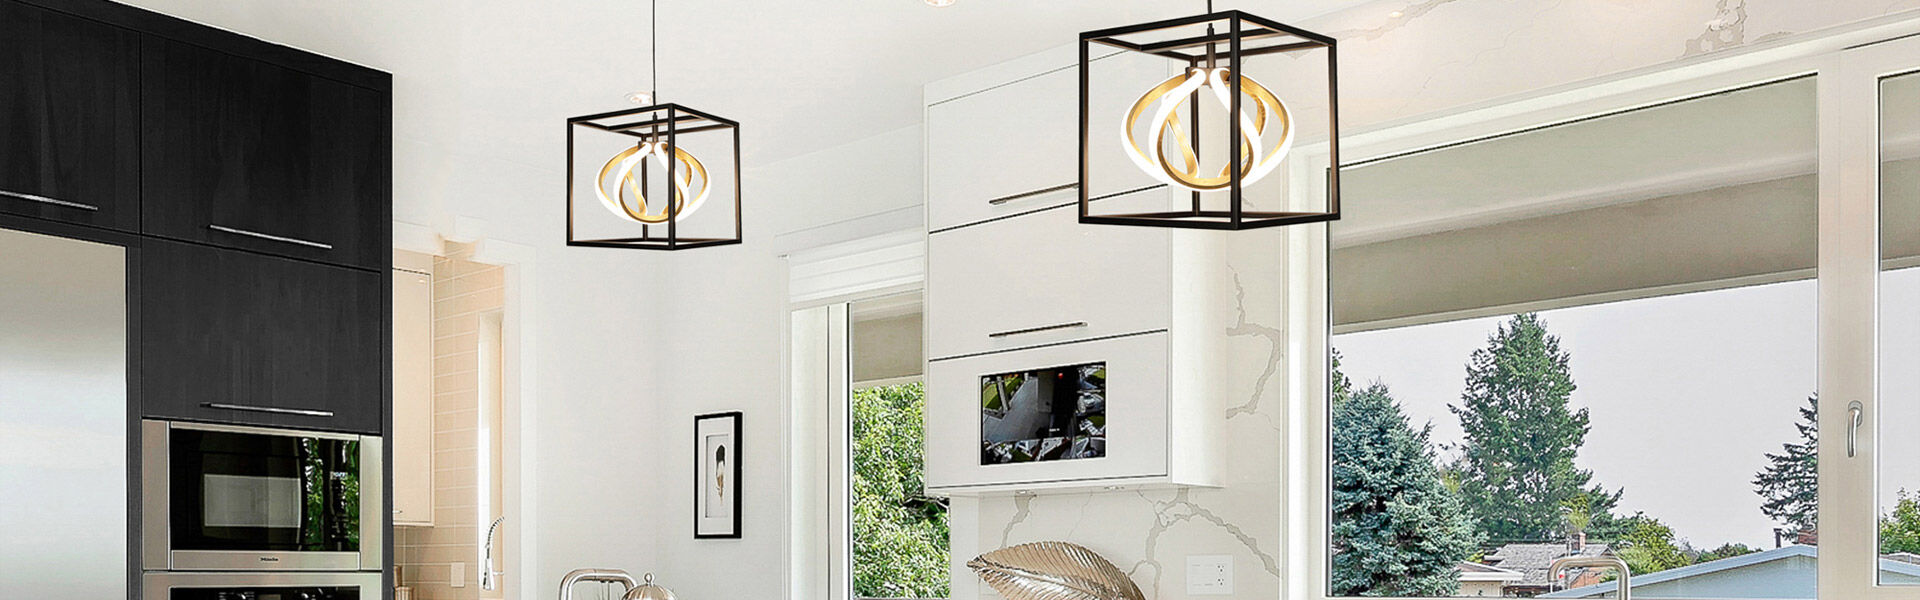 WAC Lighting | Up to 15% Off Select Designs | ends 7.8